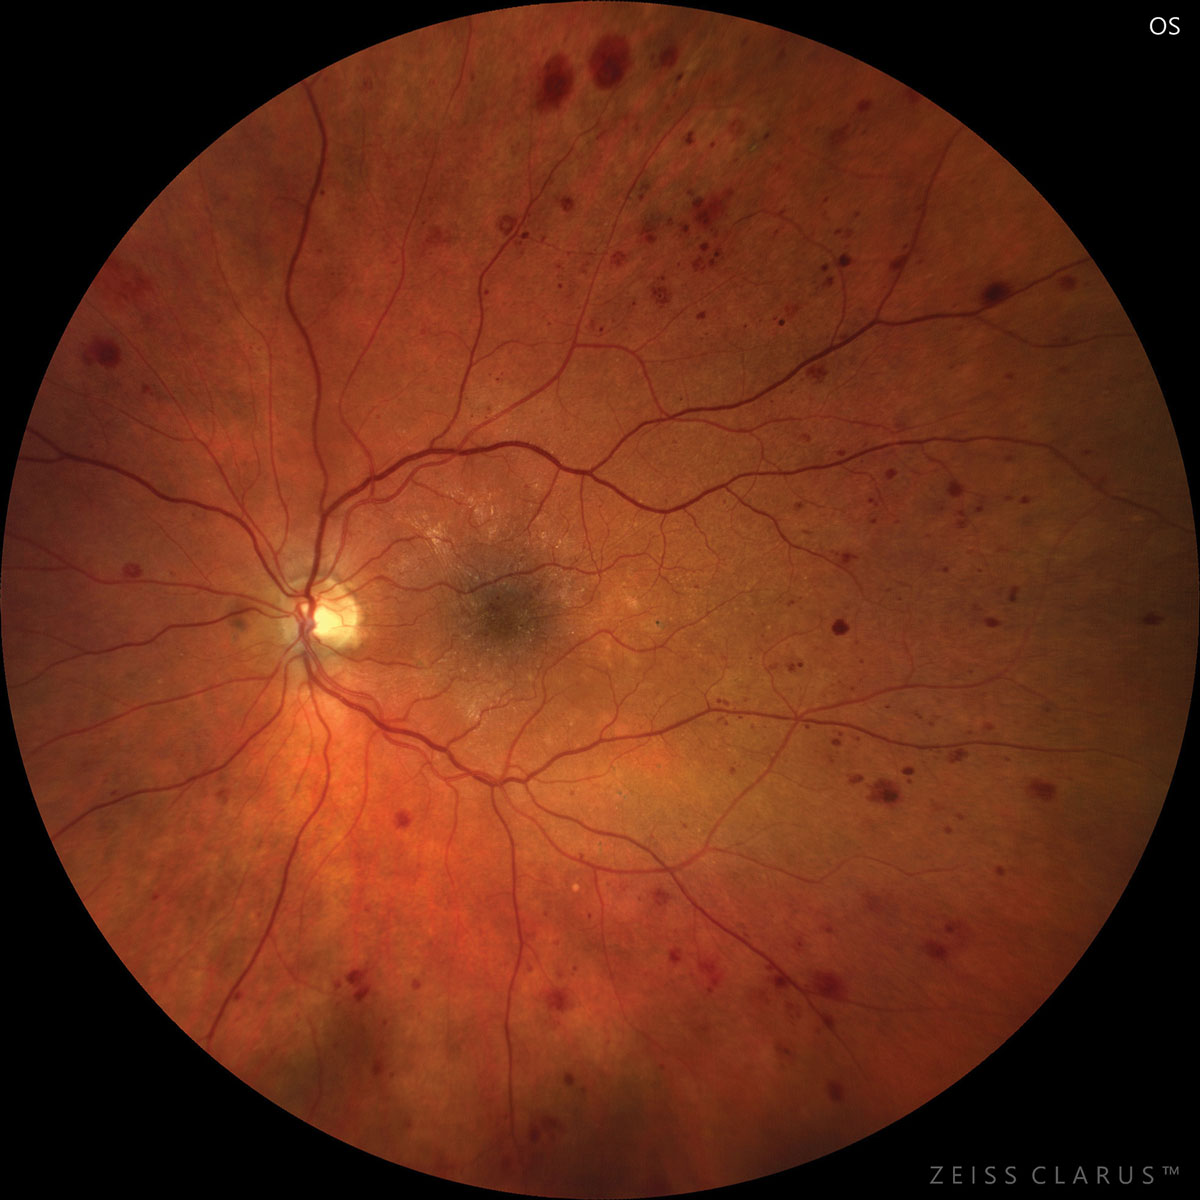 Diabetic retinopathy represents an independent risk factor for stroke, suggesting microvascular pathology plays a role.